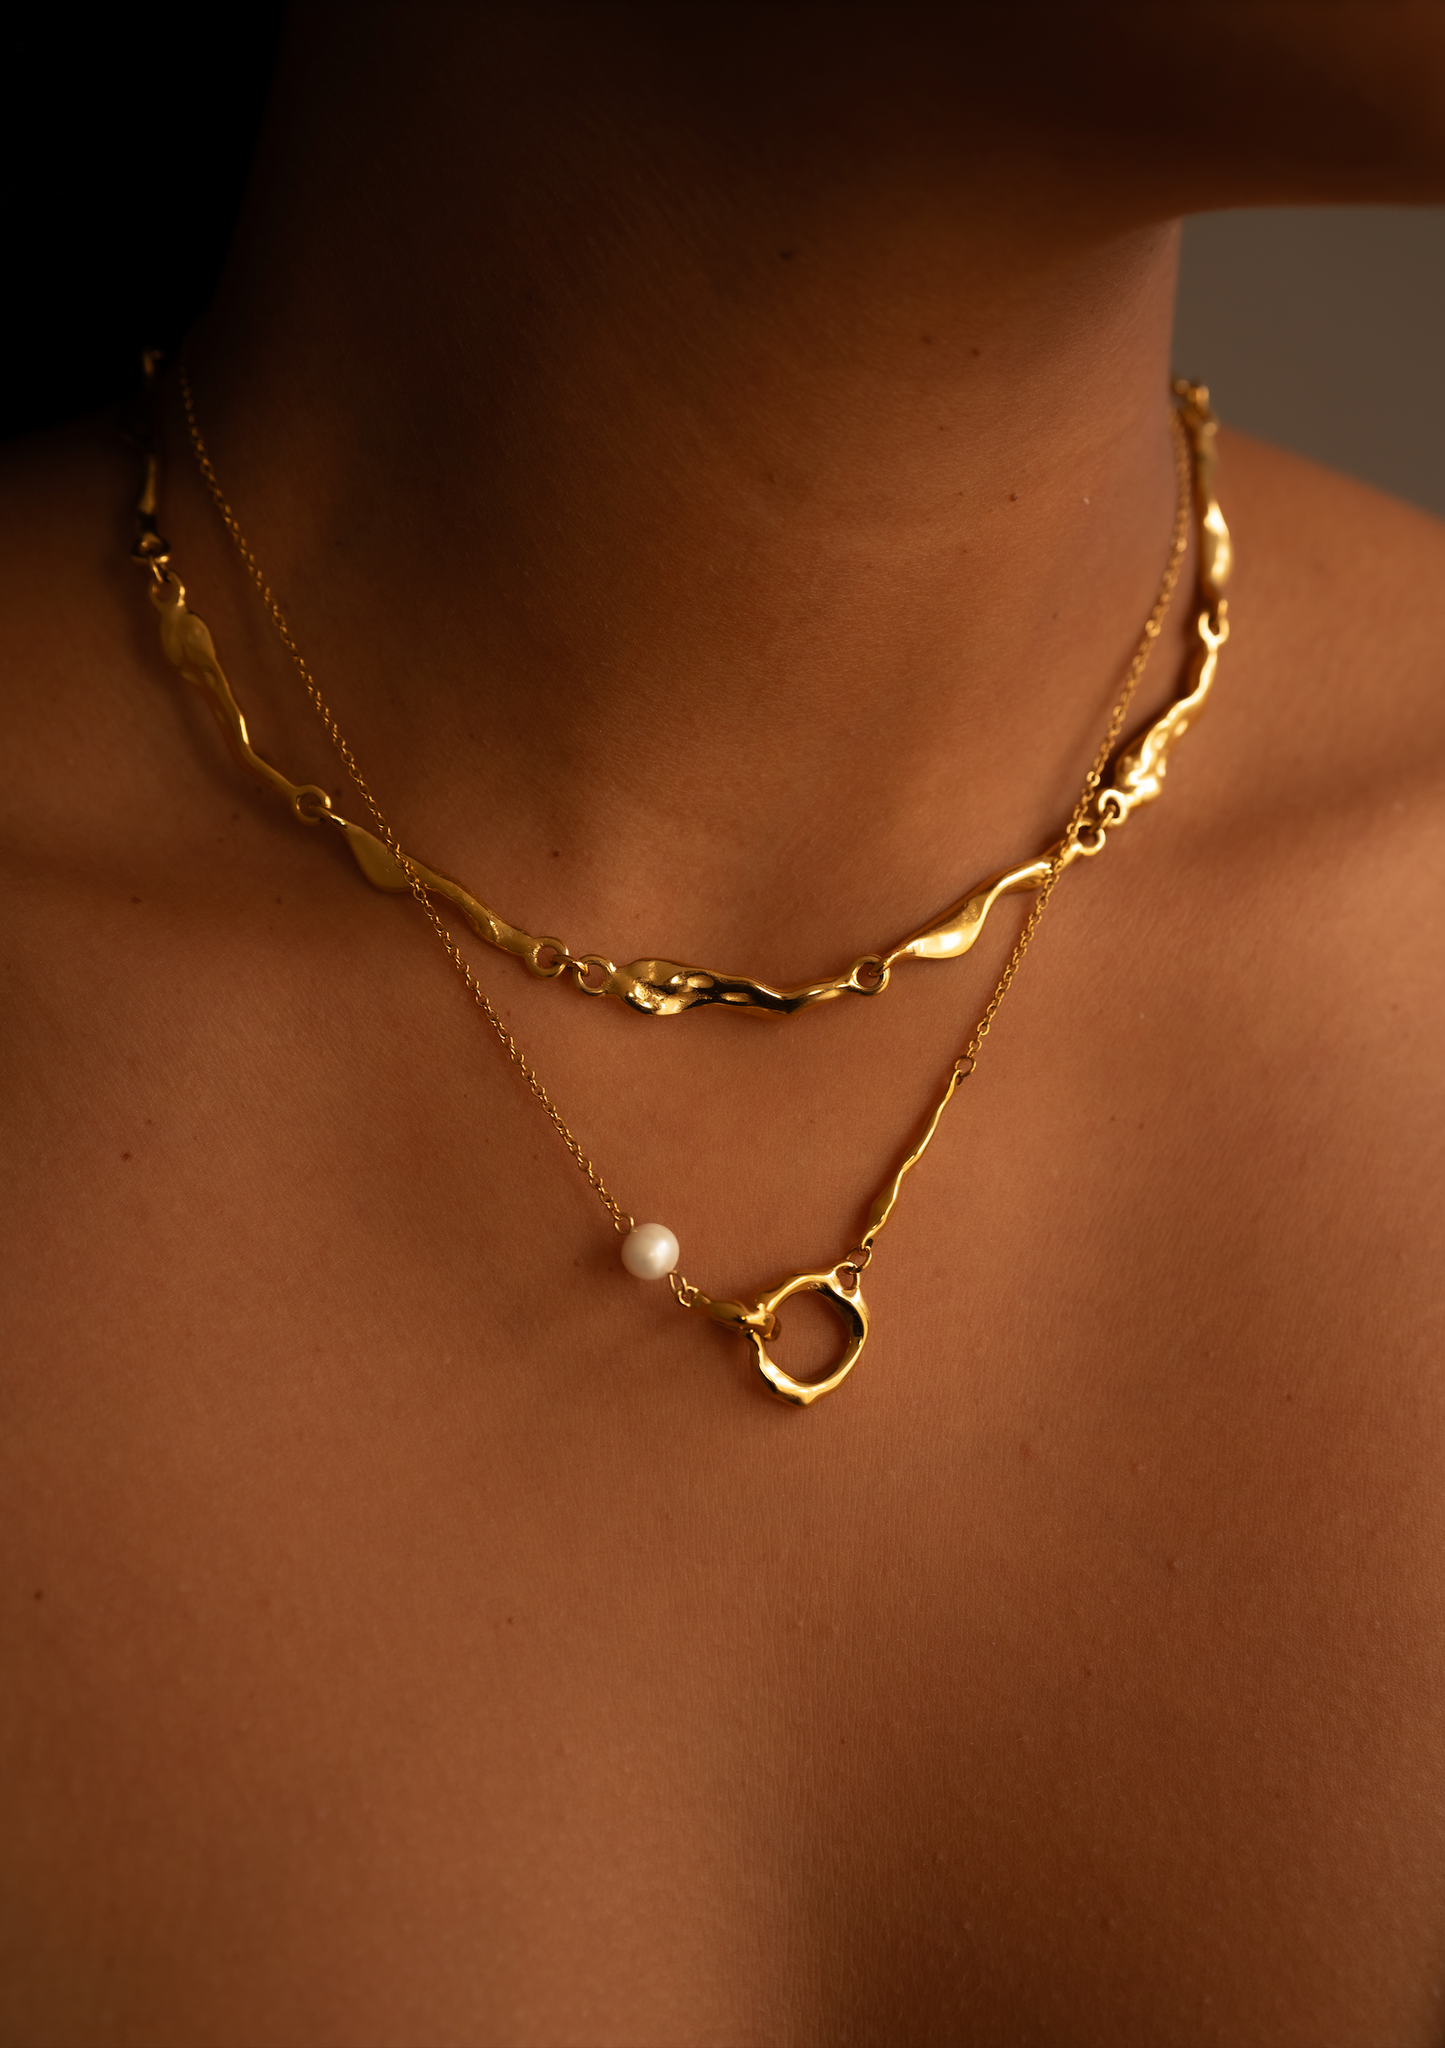 Ume necklace